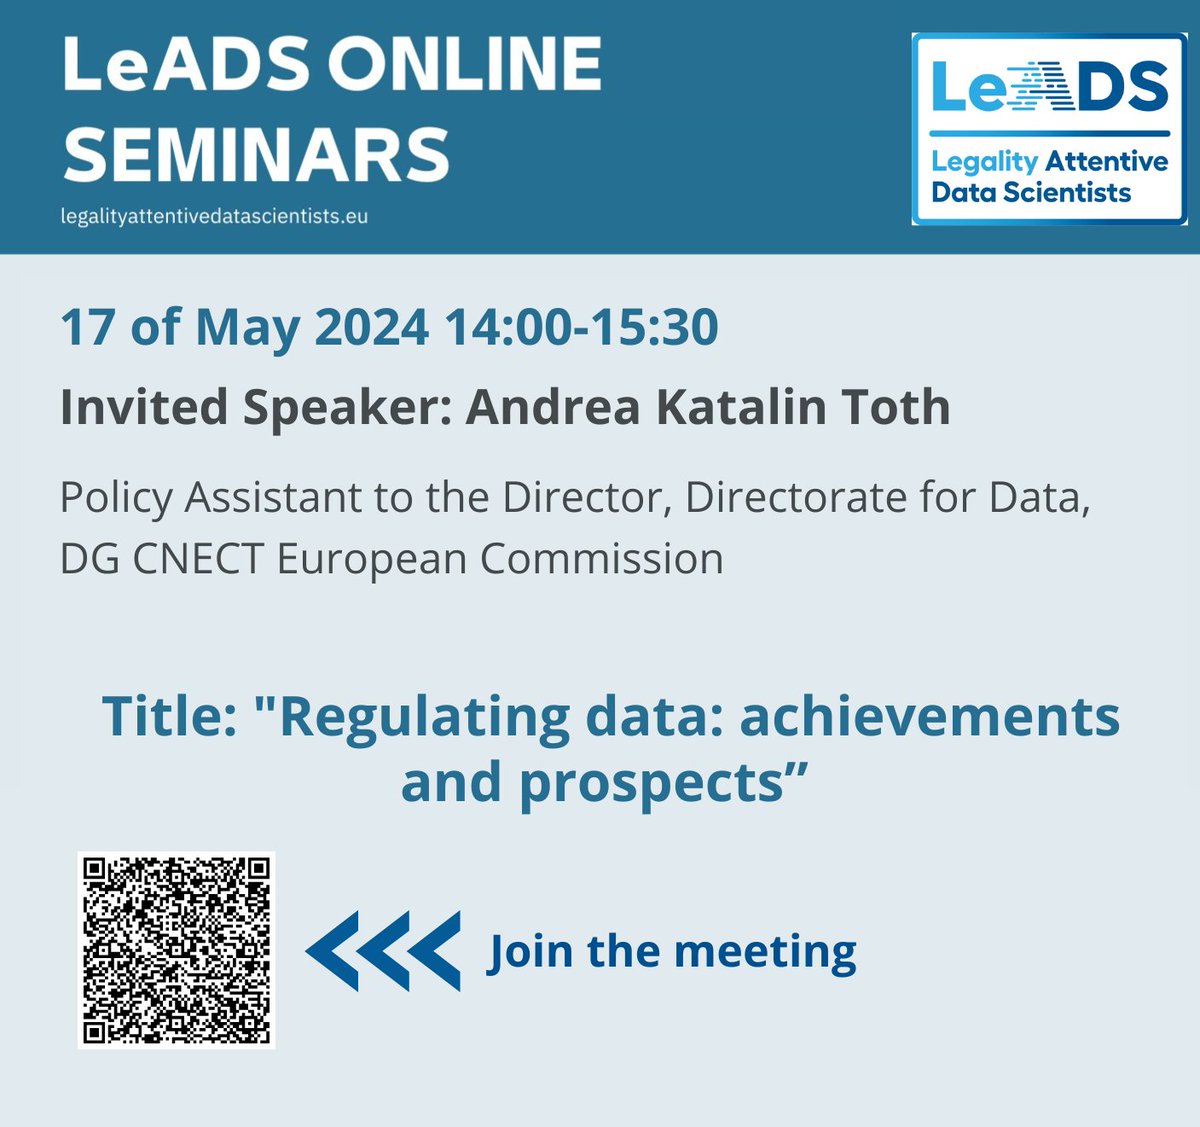 📌TODAY!! LeADS invites you to attend the online seminar featuring Andrea Katalin Toth on the topic of 'Regulating Data: Achievements and Prospects' to be held from 2:00 pm to 3:30 pm. 👇